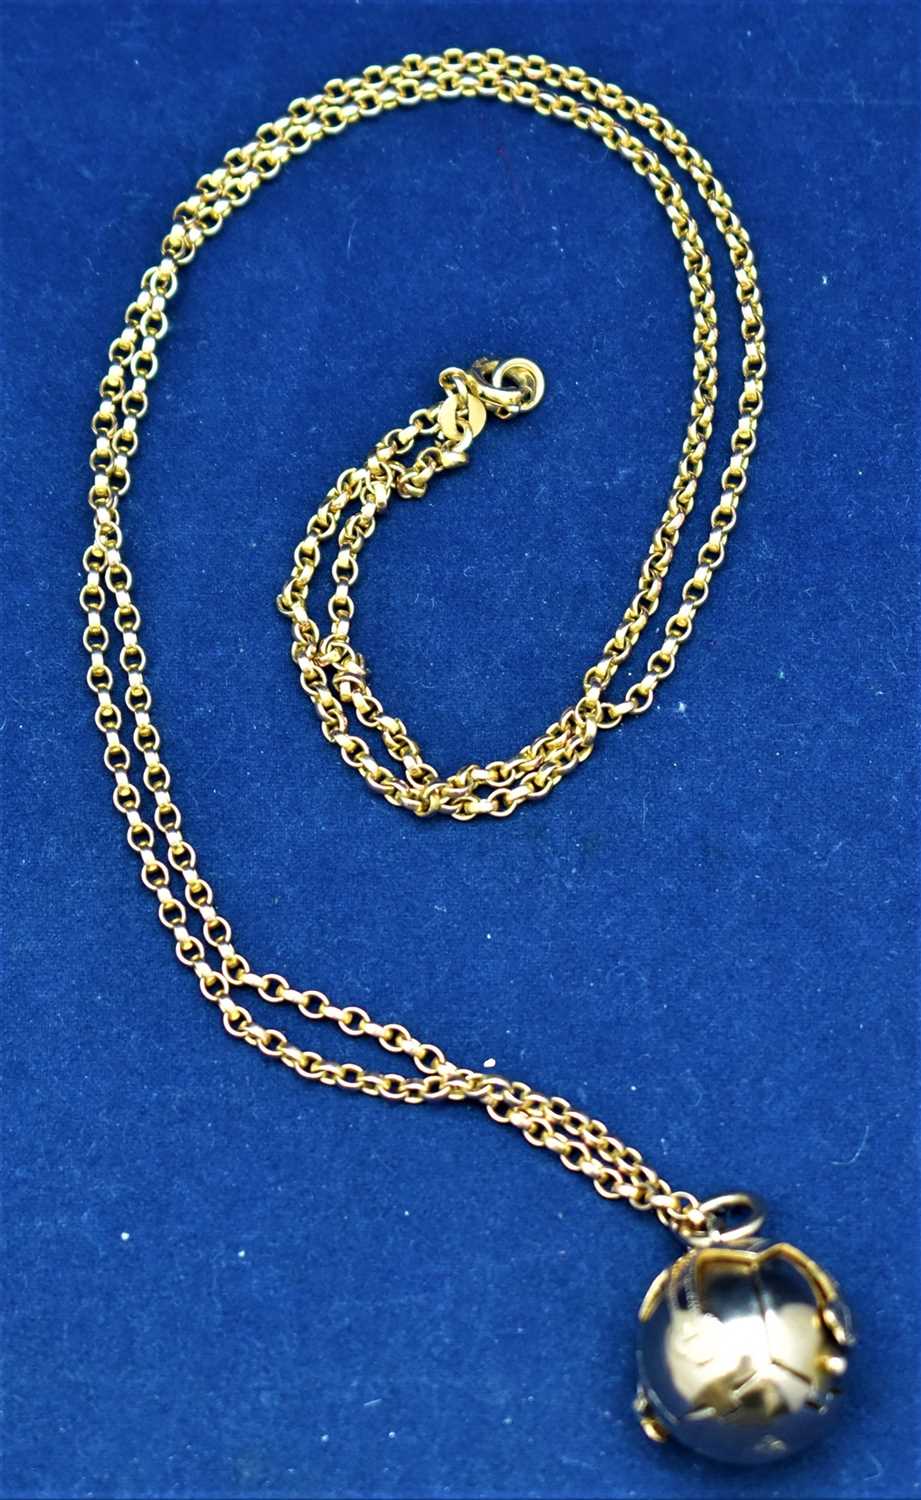 Lot 11 - Ball pendant and chain